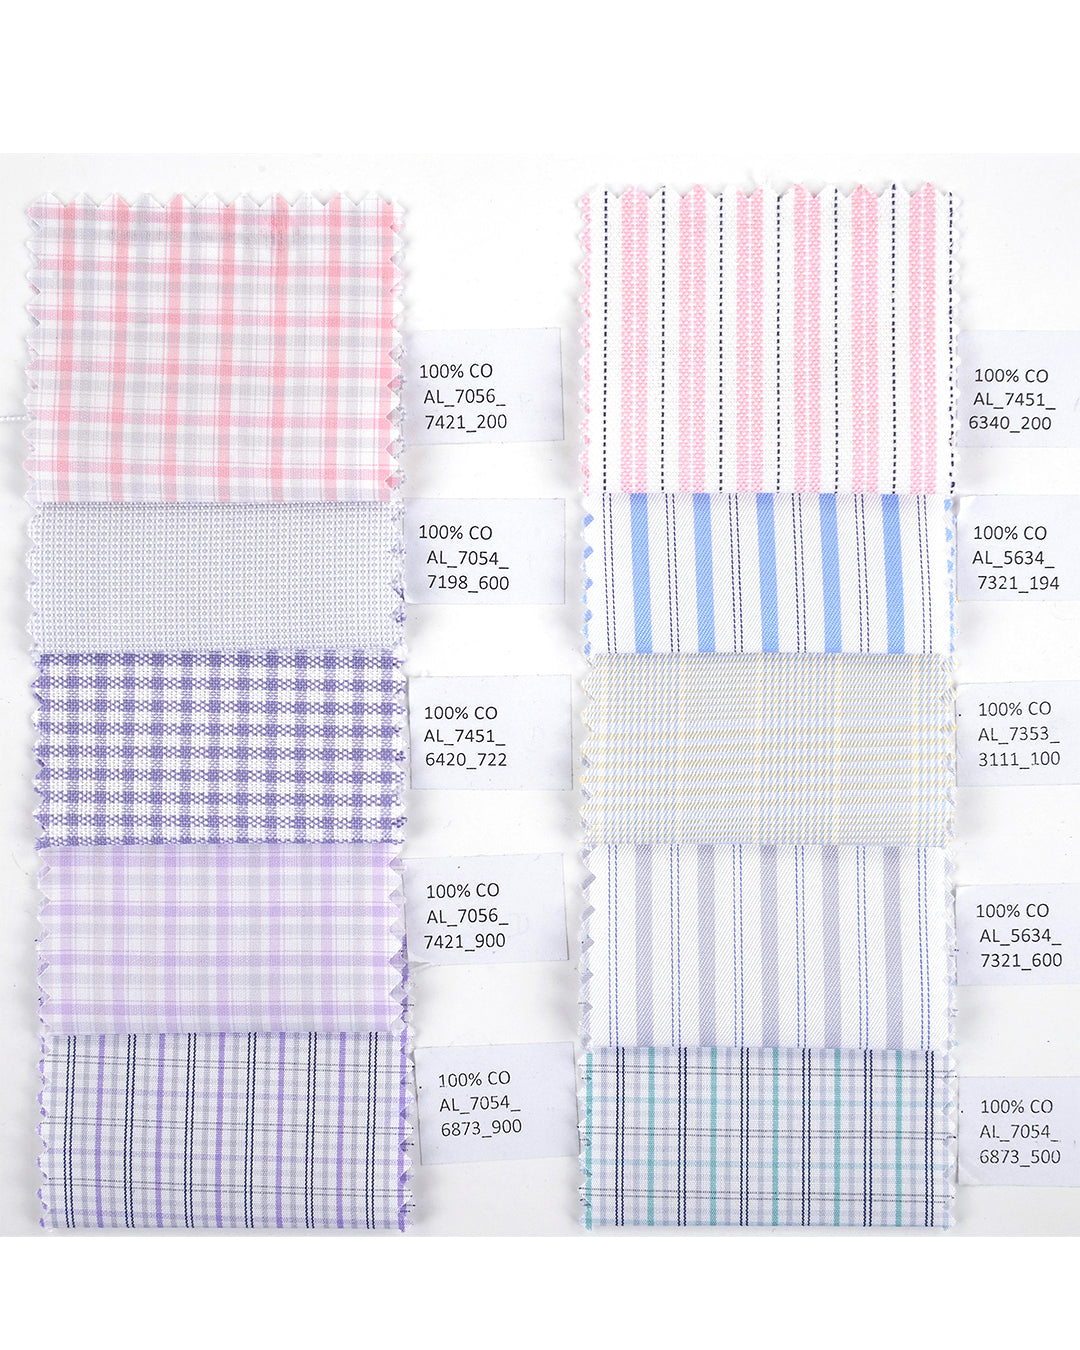 Swatches of the custom oxford shirt for men by Luxire in soft pink and navy stripes